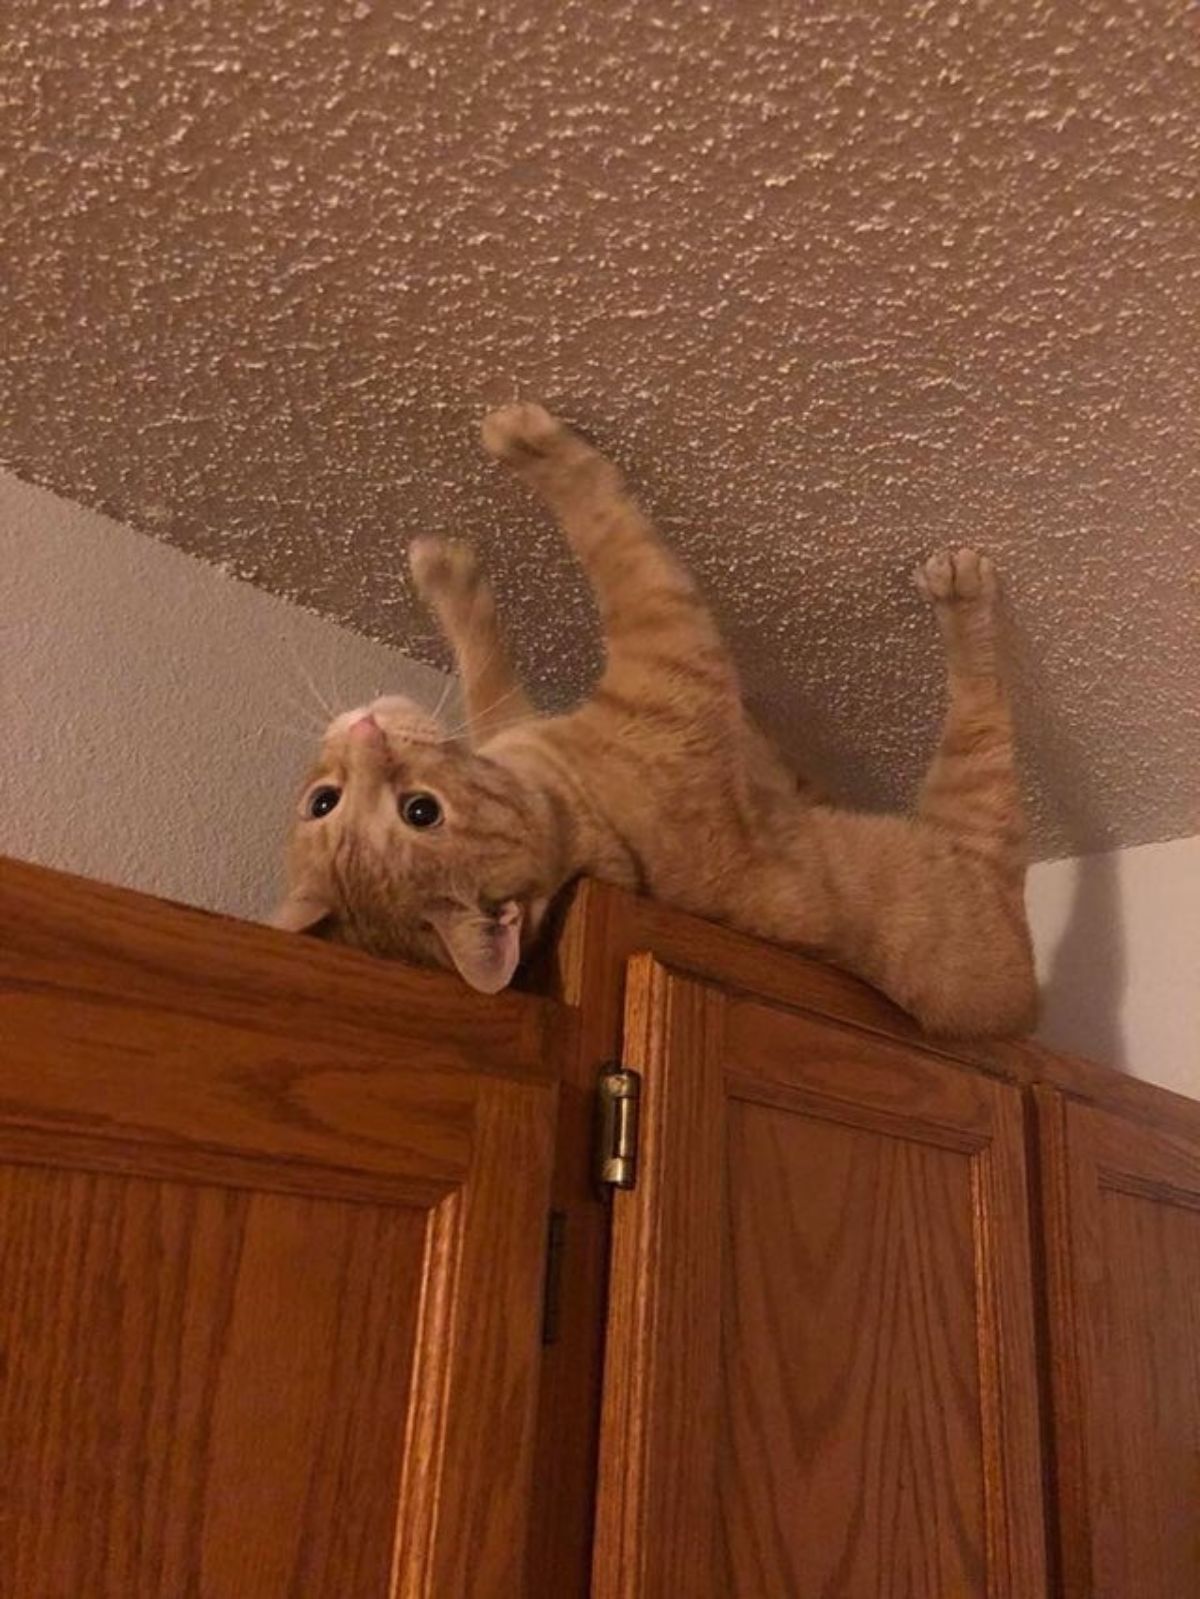 orange cat laying upside down on top of brown wooden cupaboard placing its paws on the ceiling